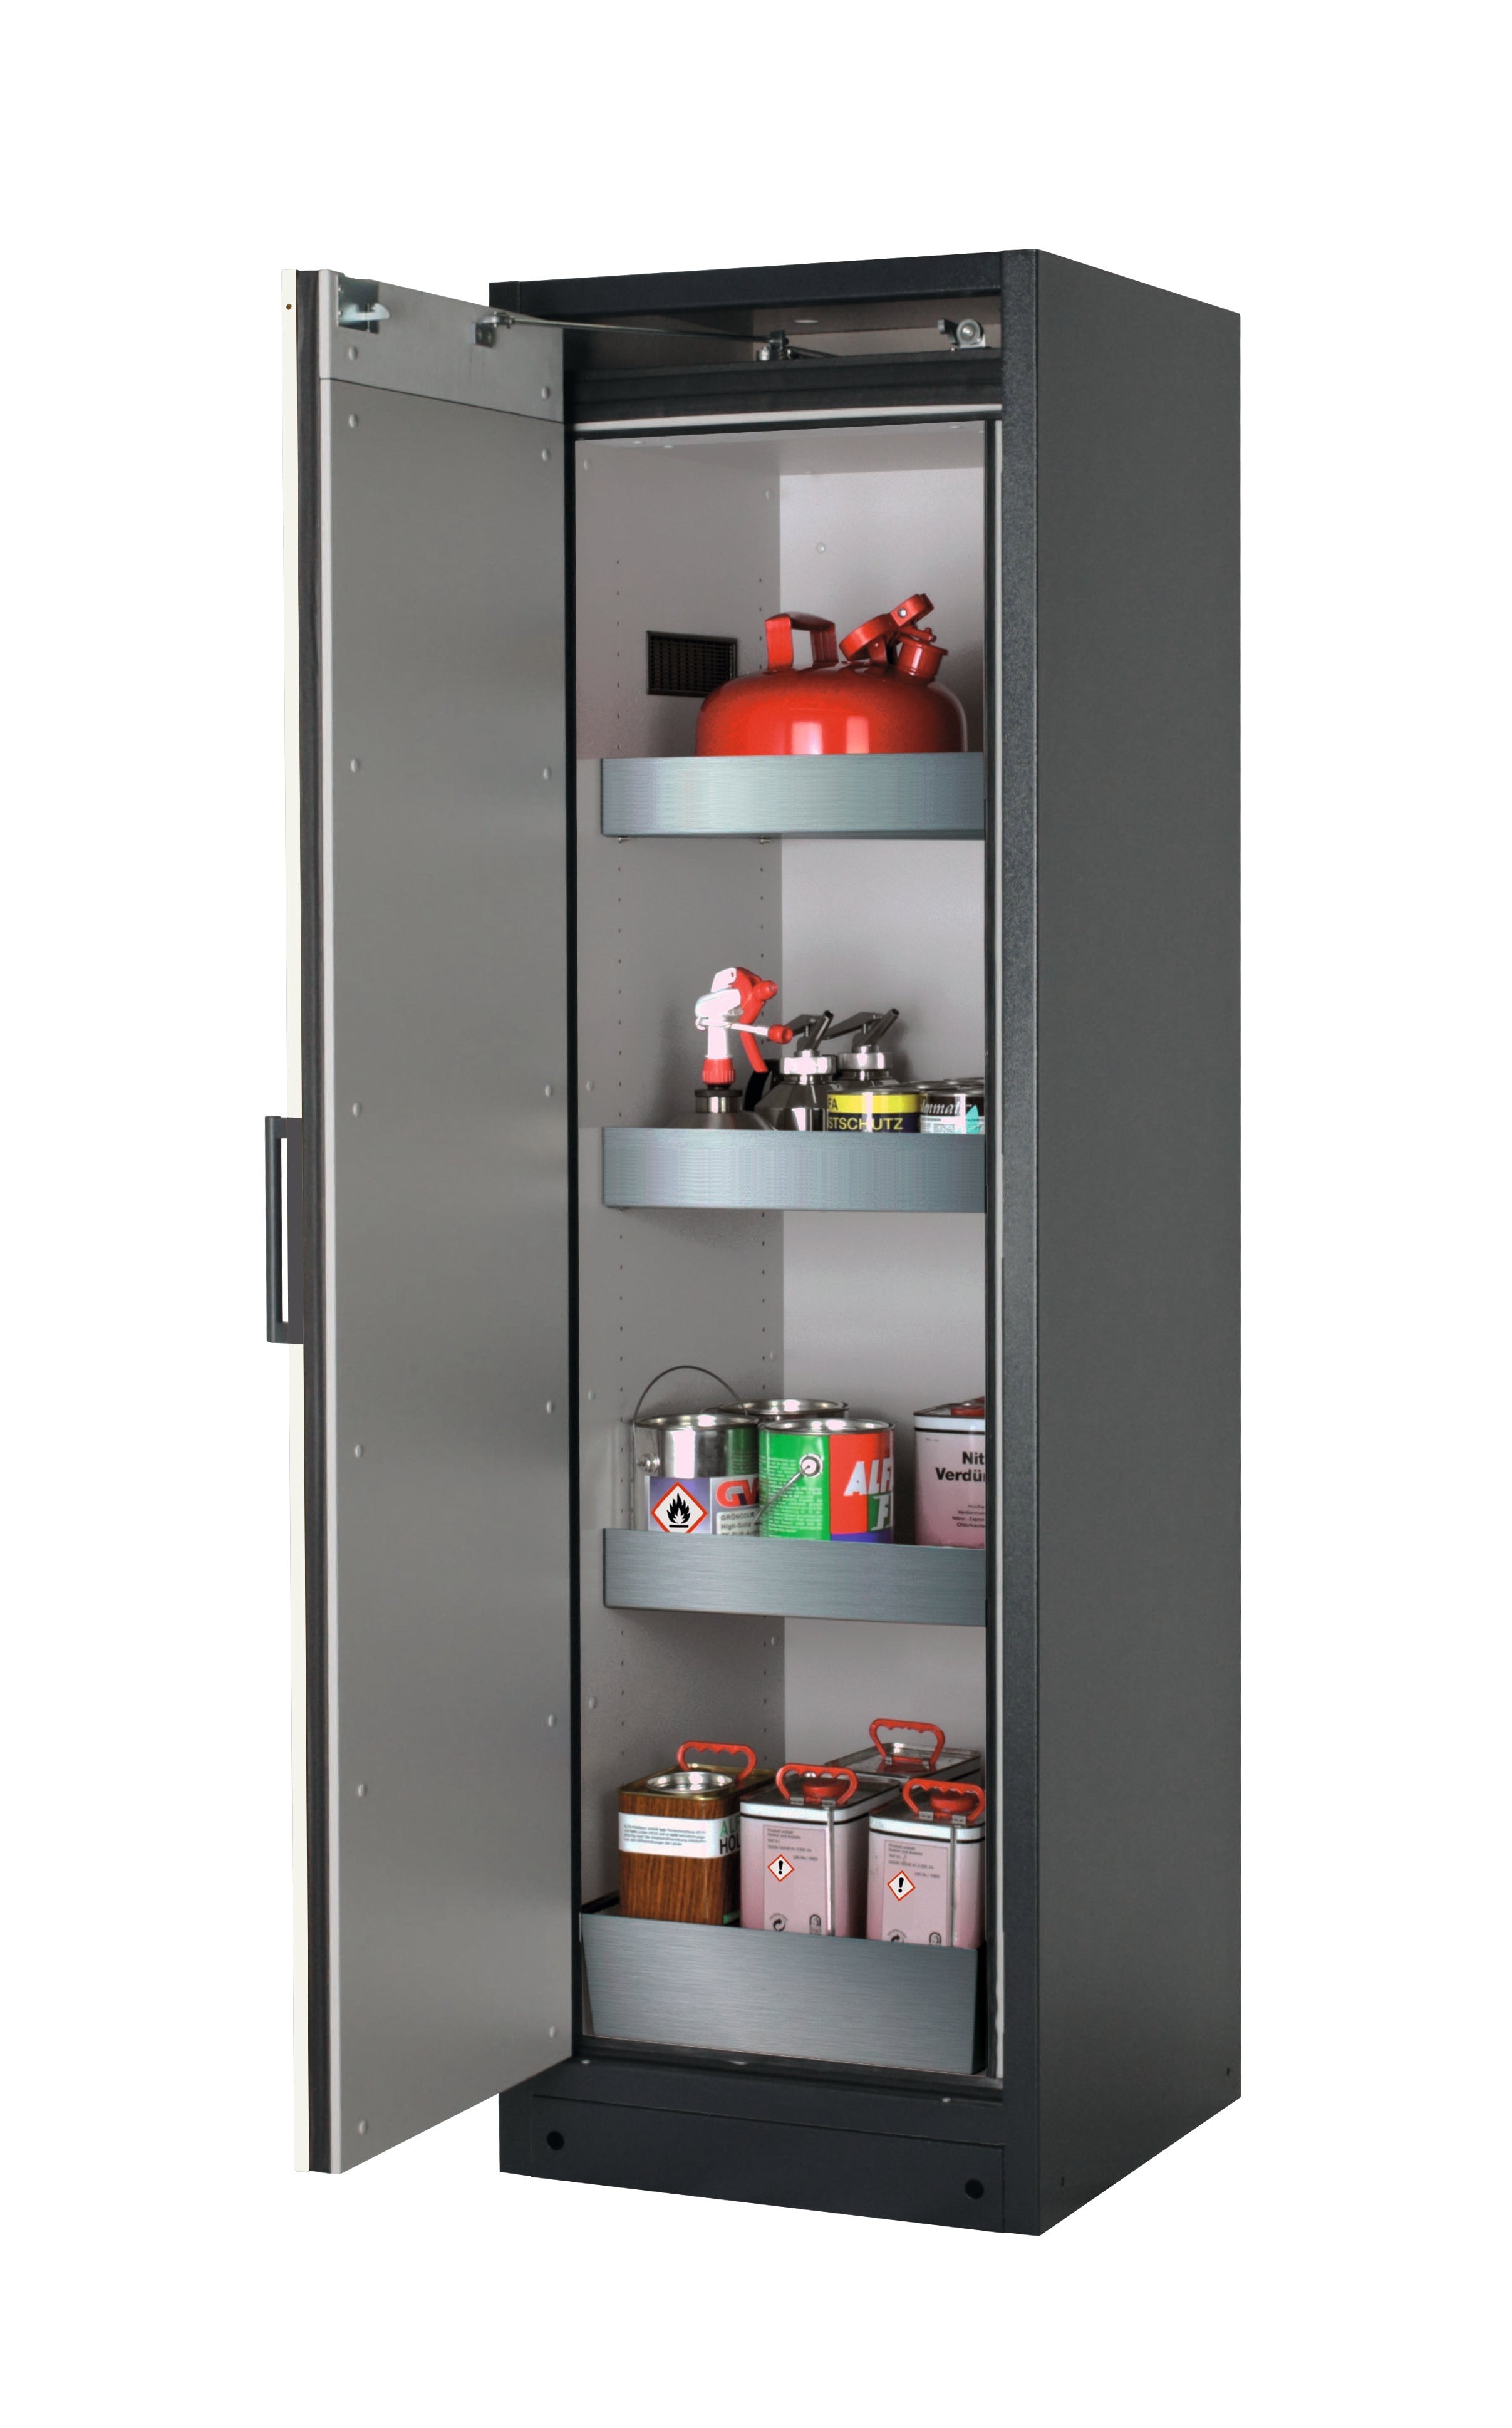 Type 90 safety storage cabinet Q-PEGASUS-90 model Q90.195.060.WDAC in asecos silver with 3x tray shelf (standard) (stainless steel 1.4301),